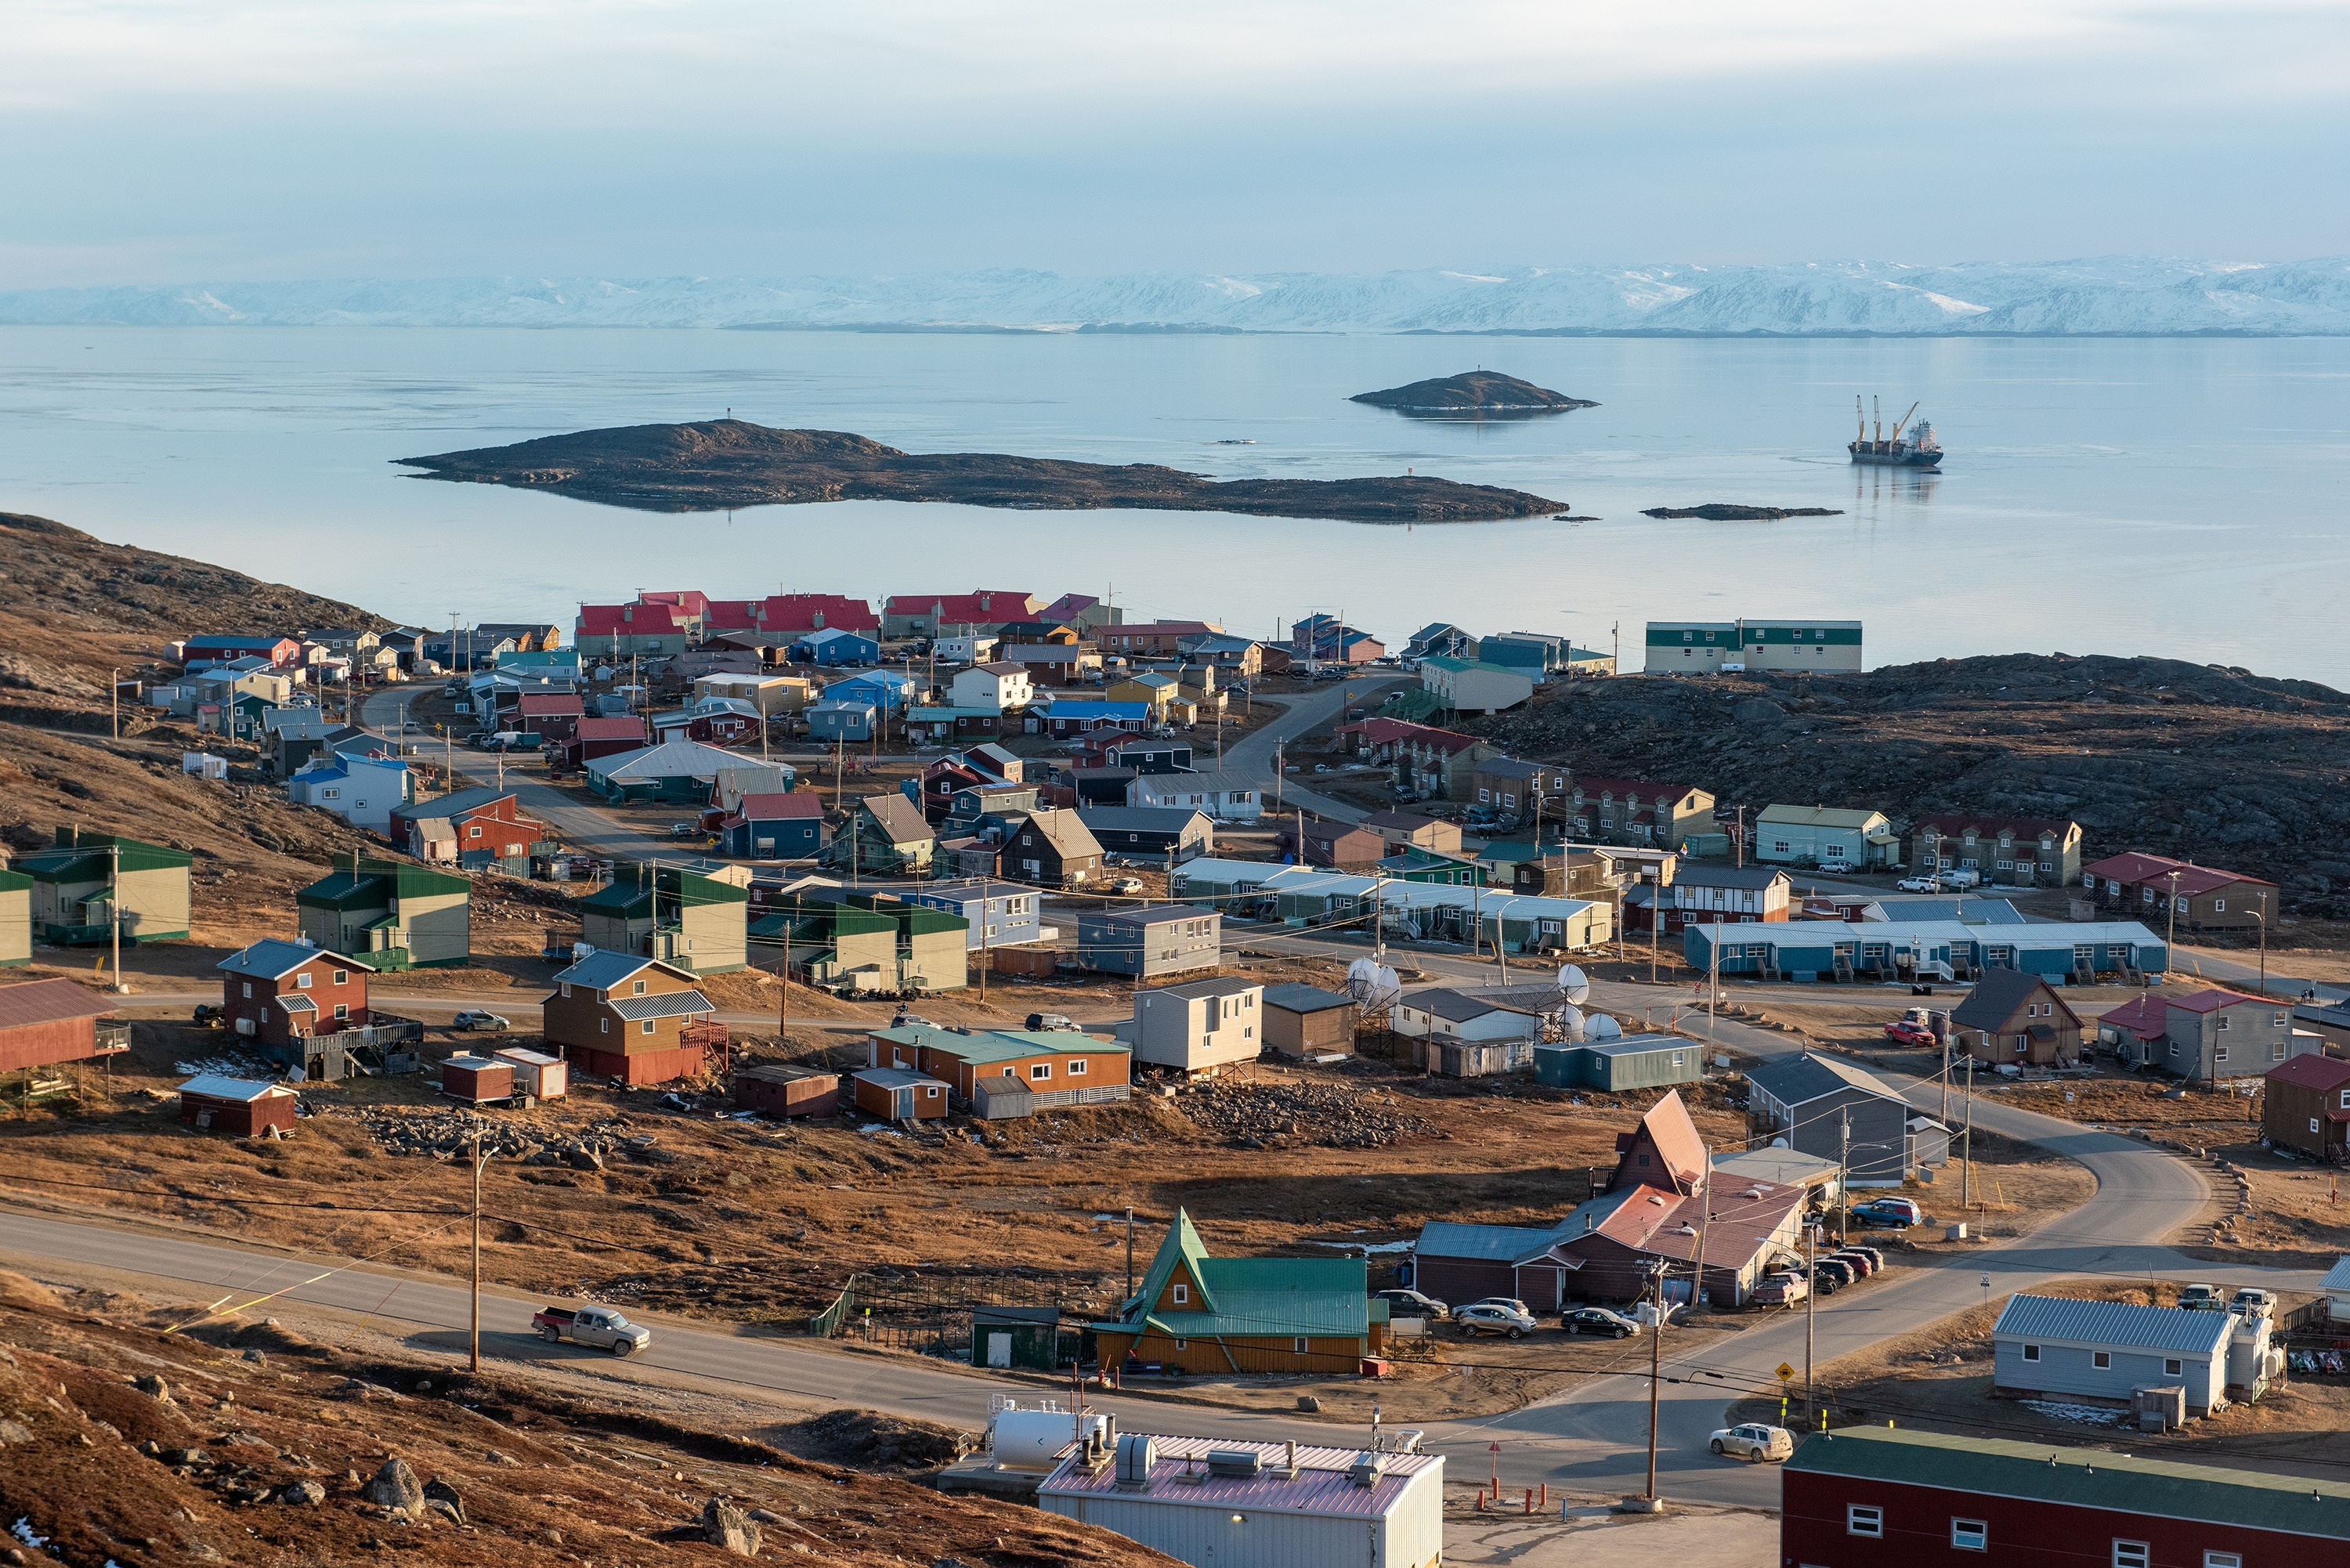 that in Iqaluit, the capital of Nunavut, instead of a rush hour, they have what locals call a "rush minute", owing to the fact that the city is not connected to the rest of Canada by road and has a population of roughly 7,000 people who mostly work for the government with similar schedules.